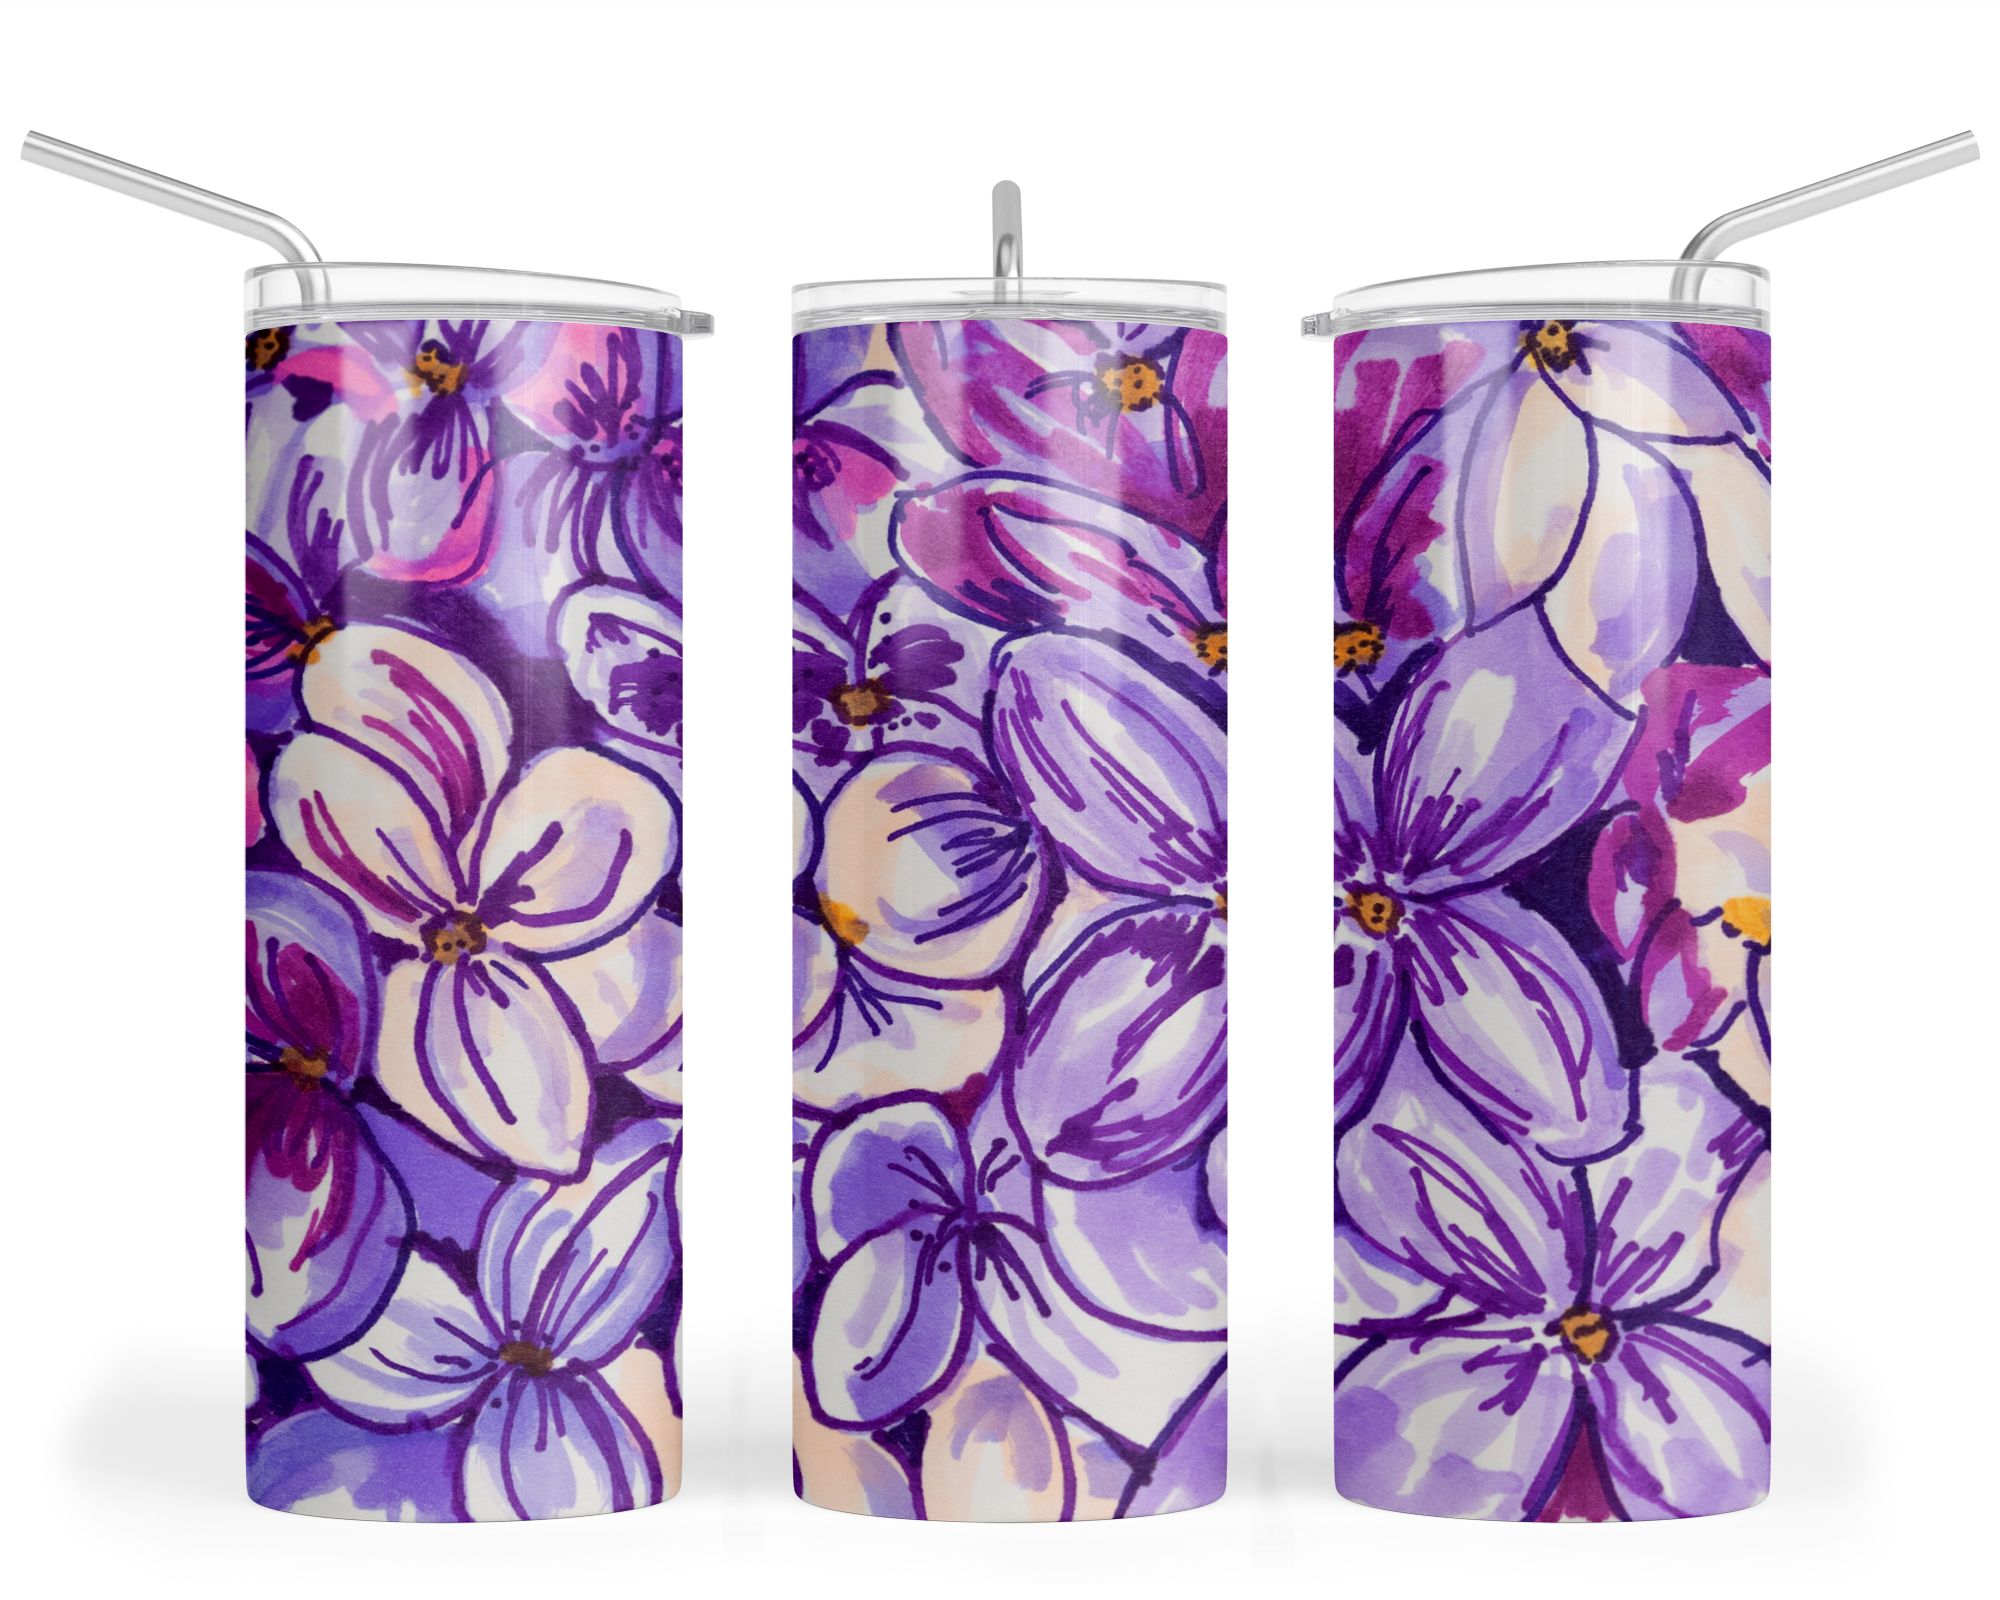 "Lots of Lilacs" - Stainless Steel Tumbler